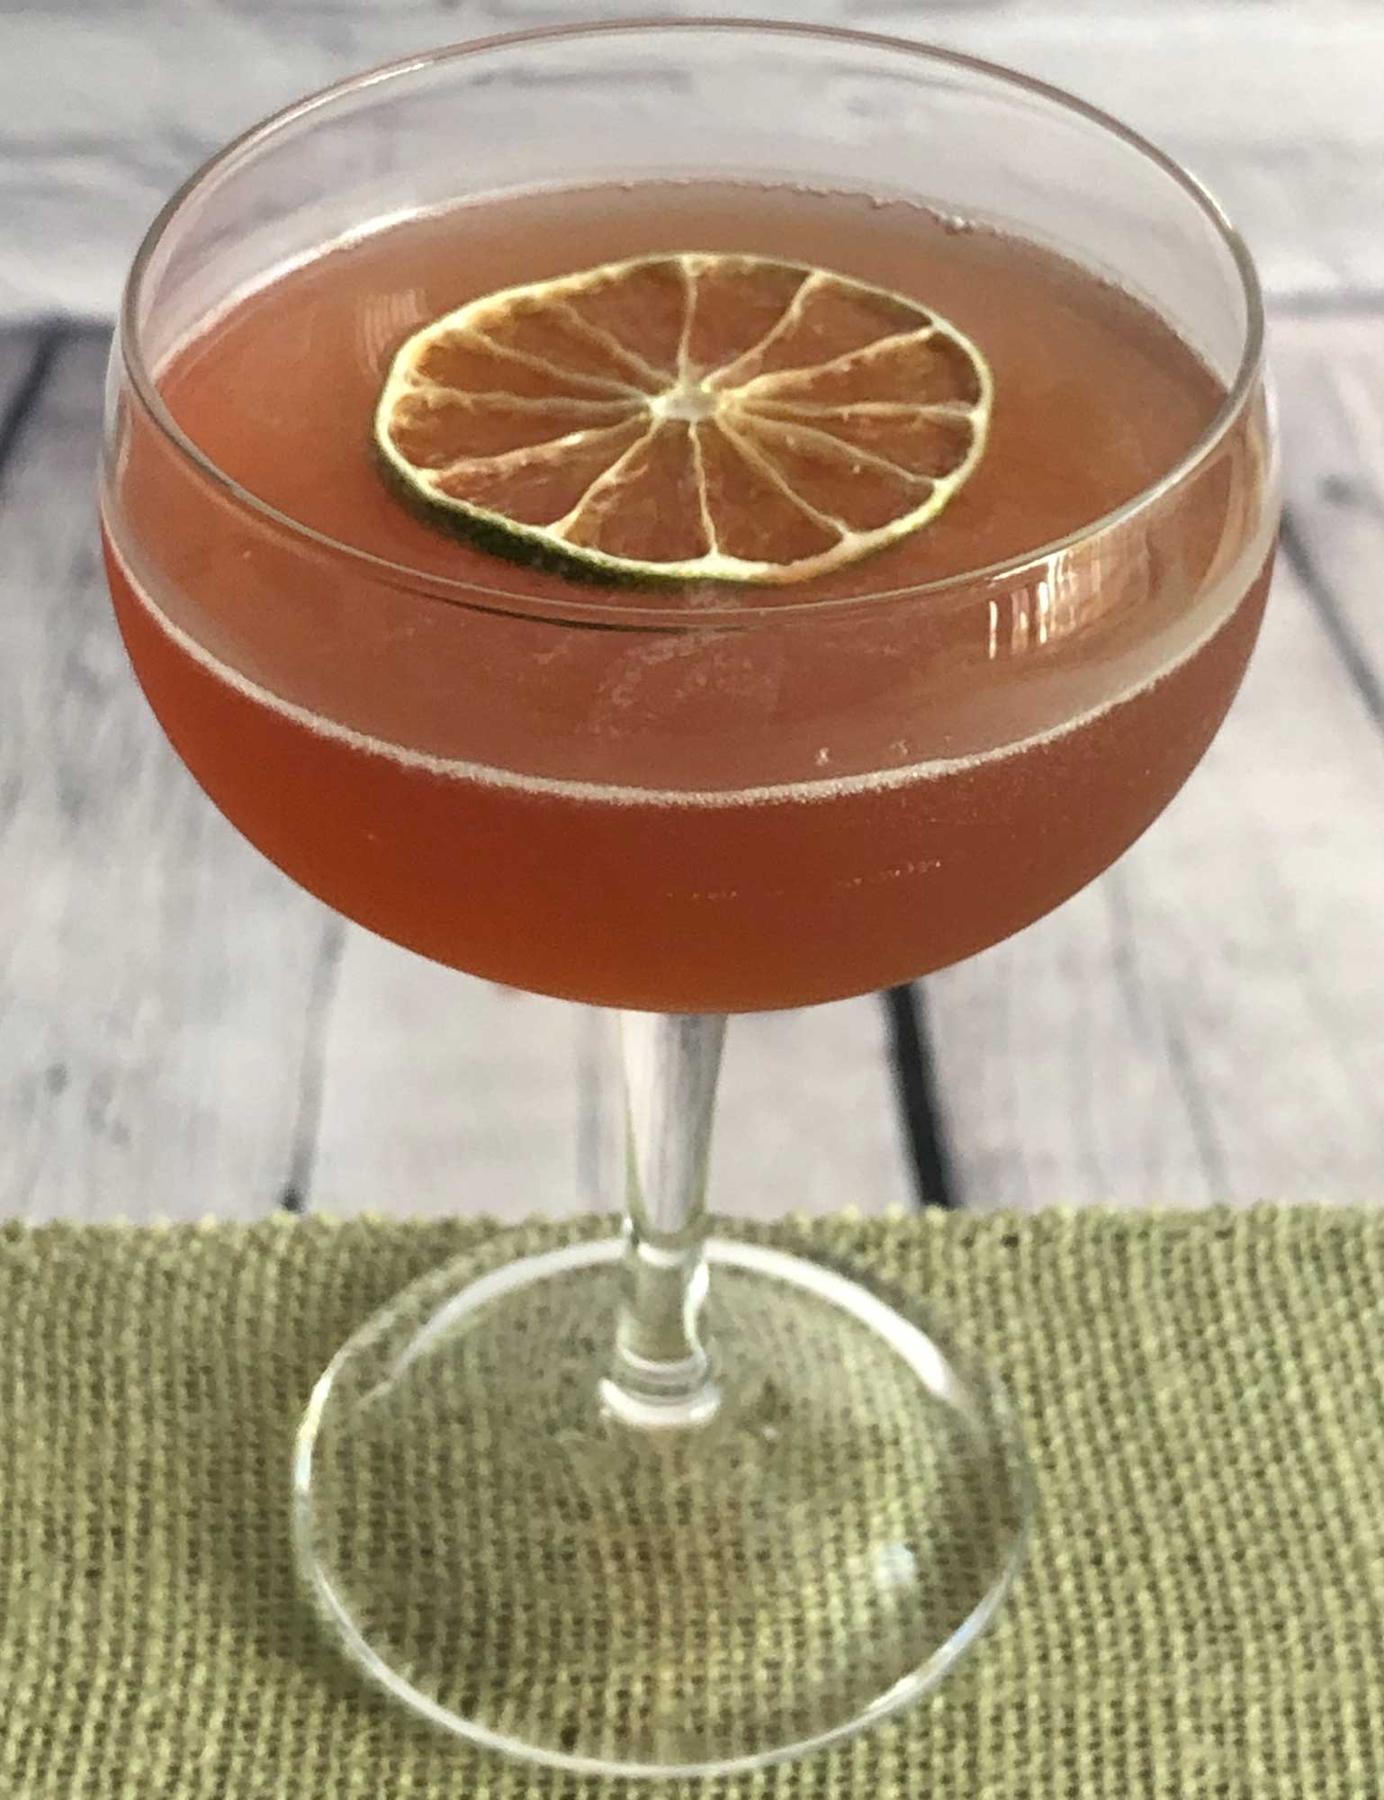 An example of the Charlie Chaplin, the mixed drink (drink), by Embury, The Fine Art of Mixing Drinks, featuring Blume Marillen Apricot Eau-de-Vie, Hayman’s Sloe Gin, and lime juice; photo by Lee Edwards